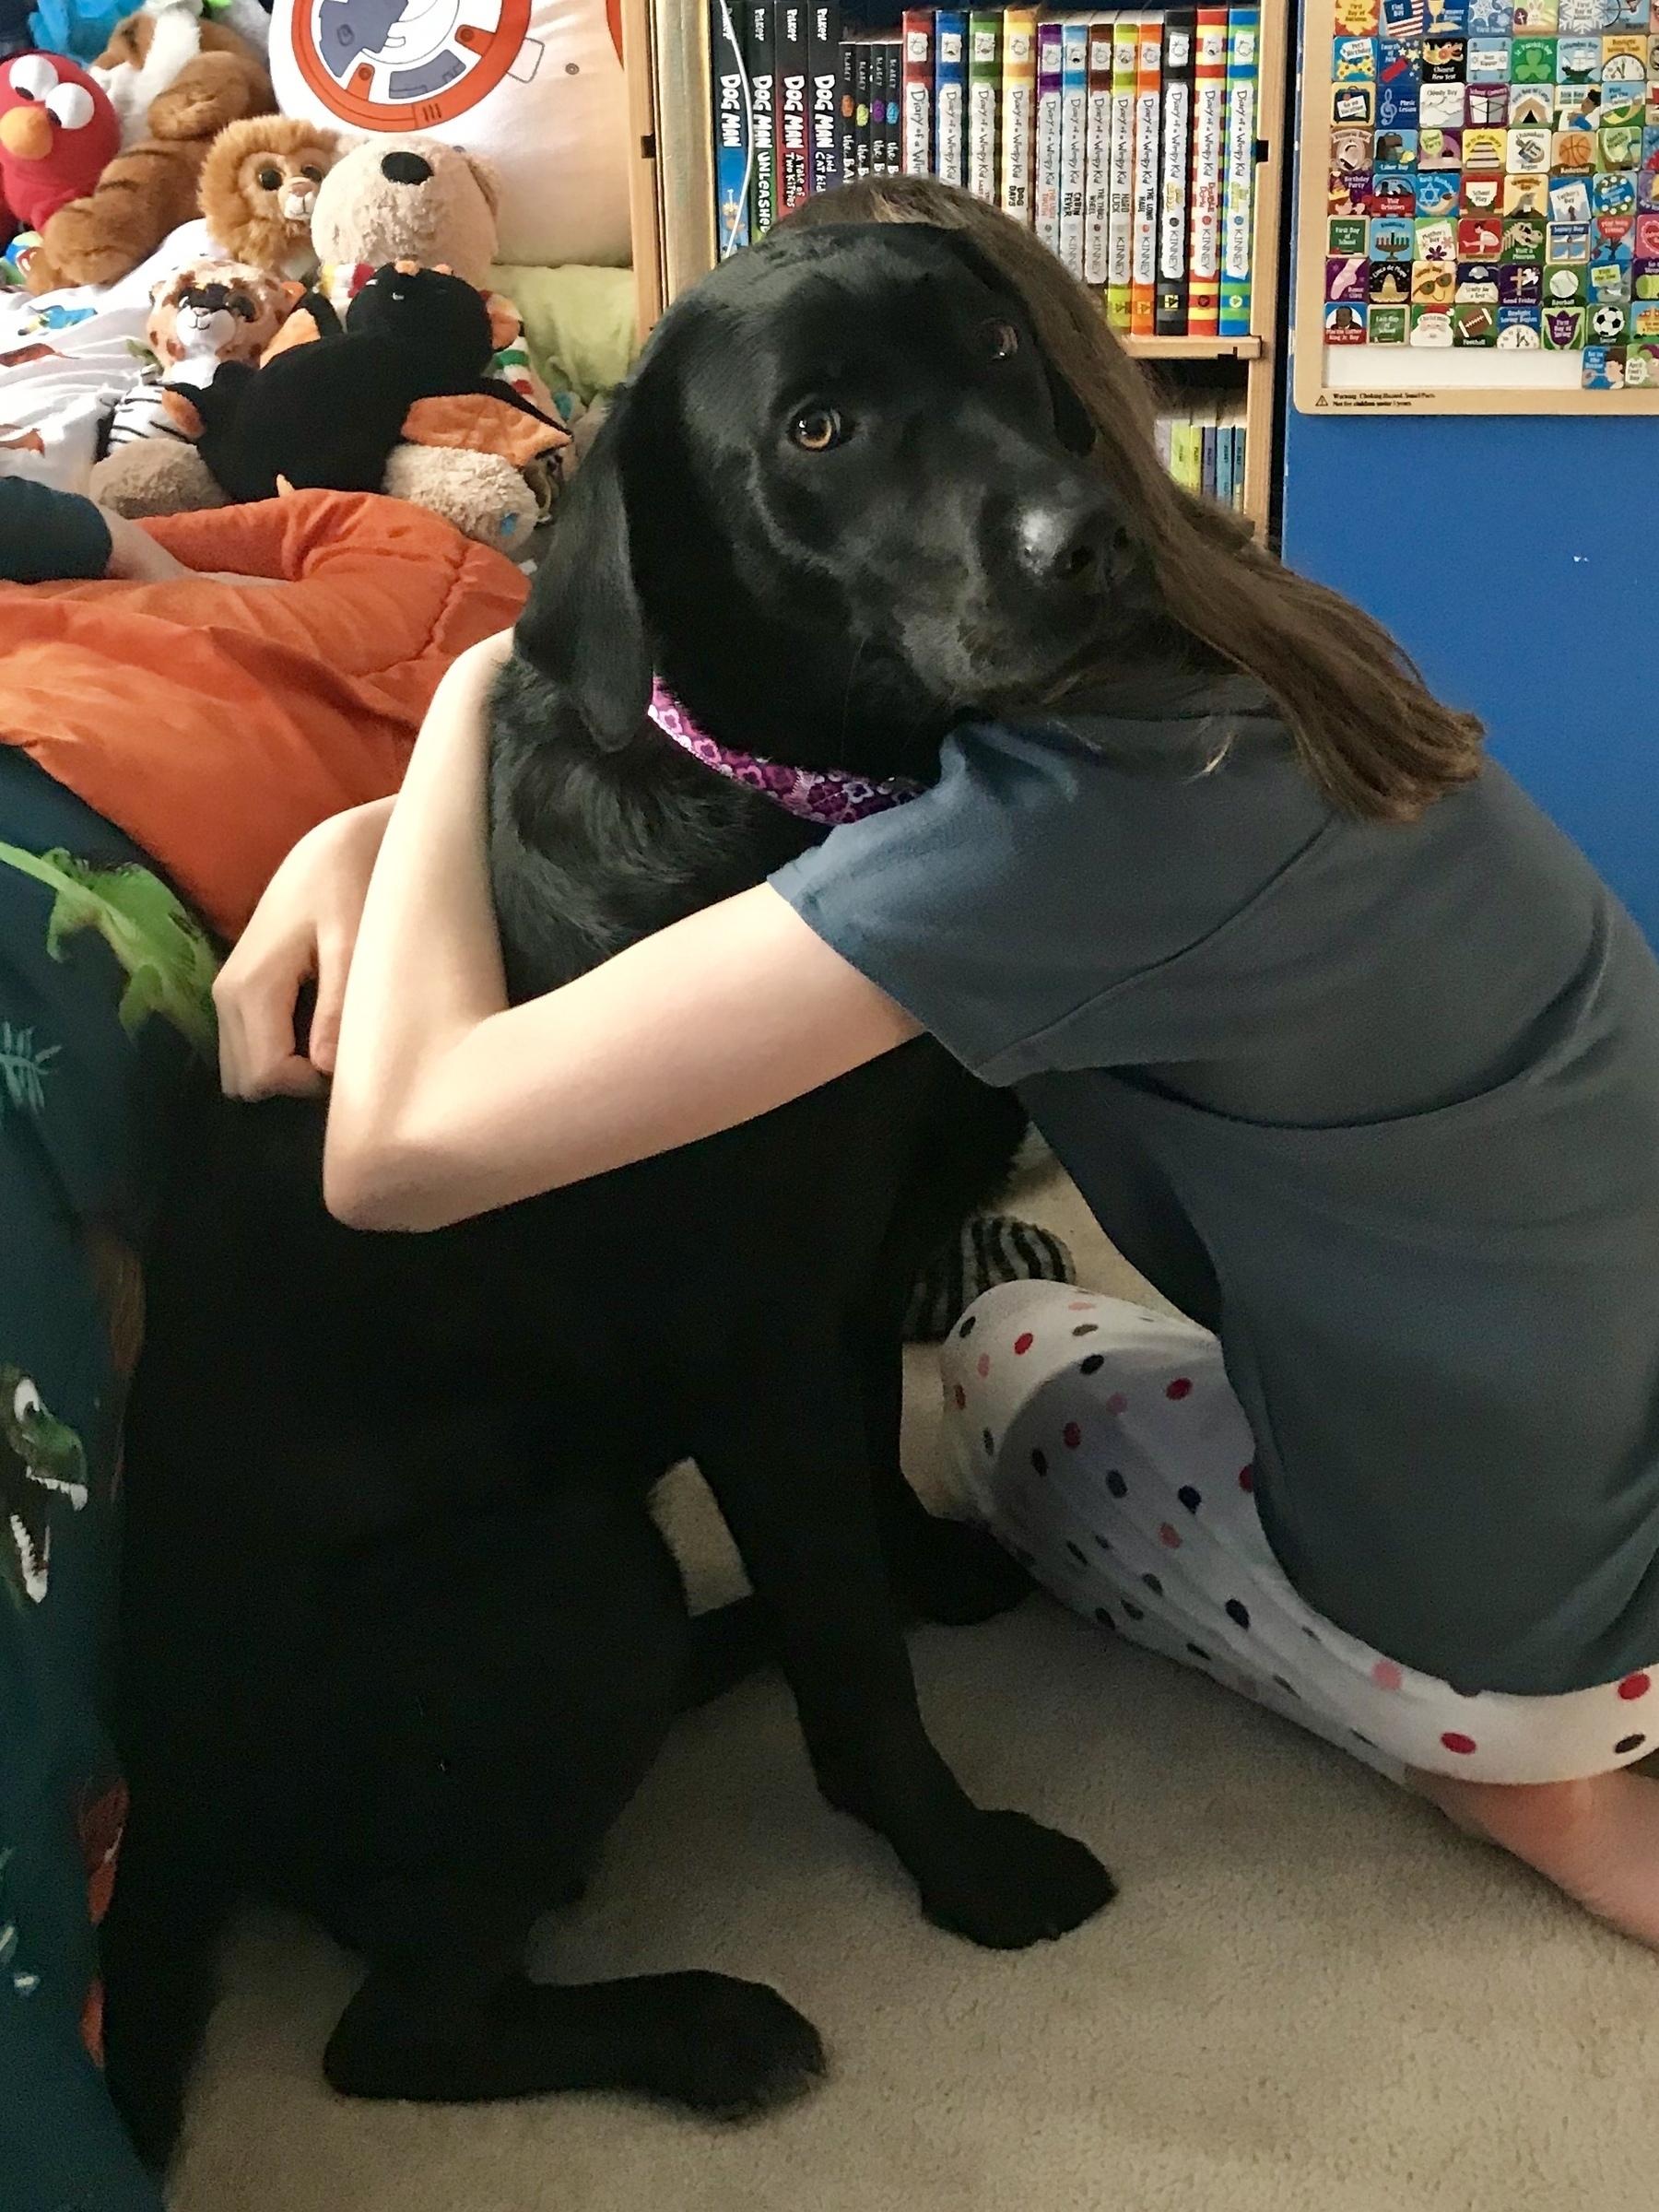 Black lab looking at the camera while wrapped in a hug by a kid